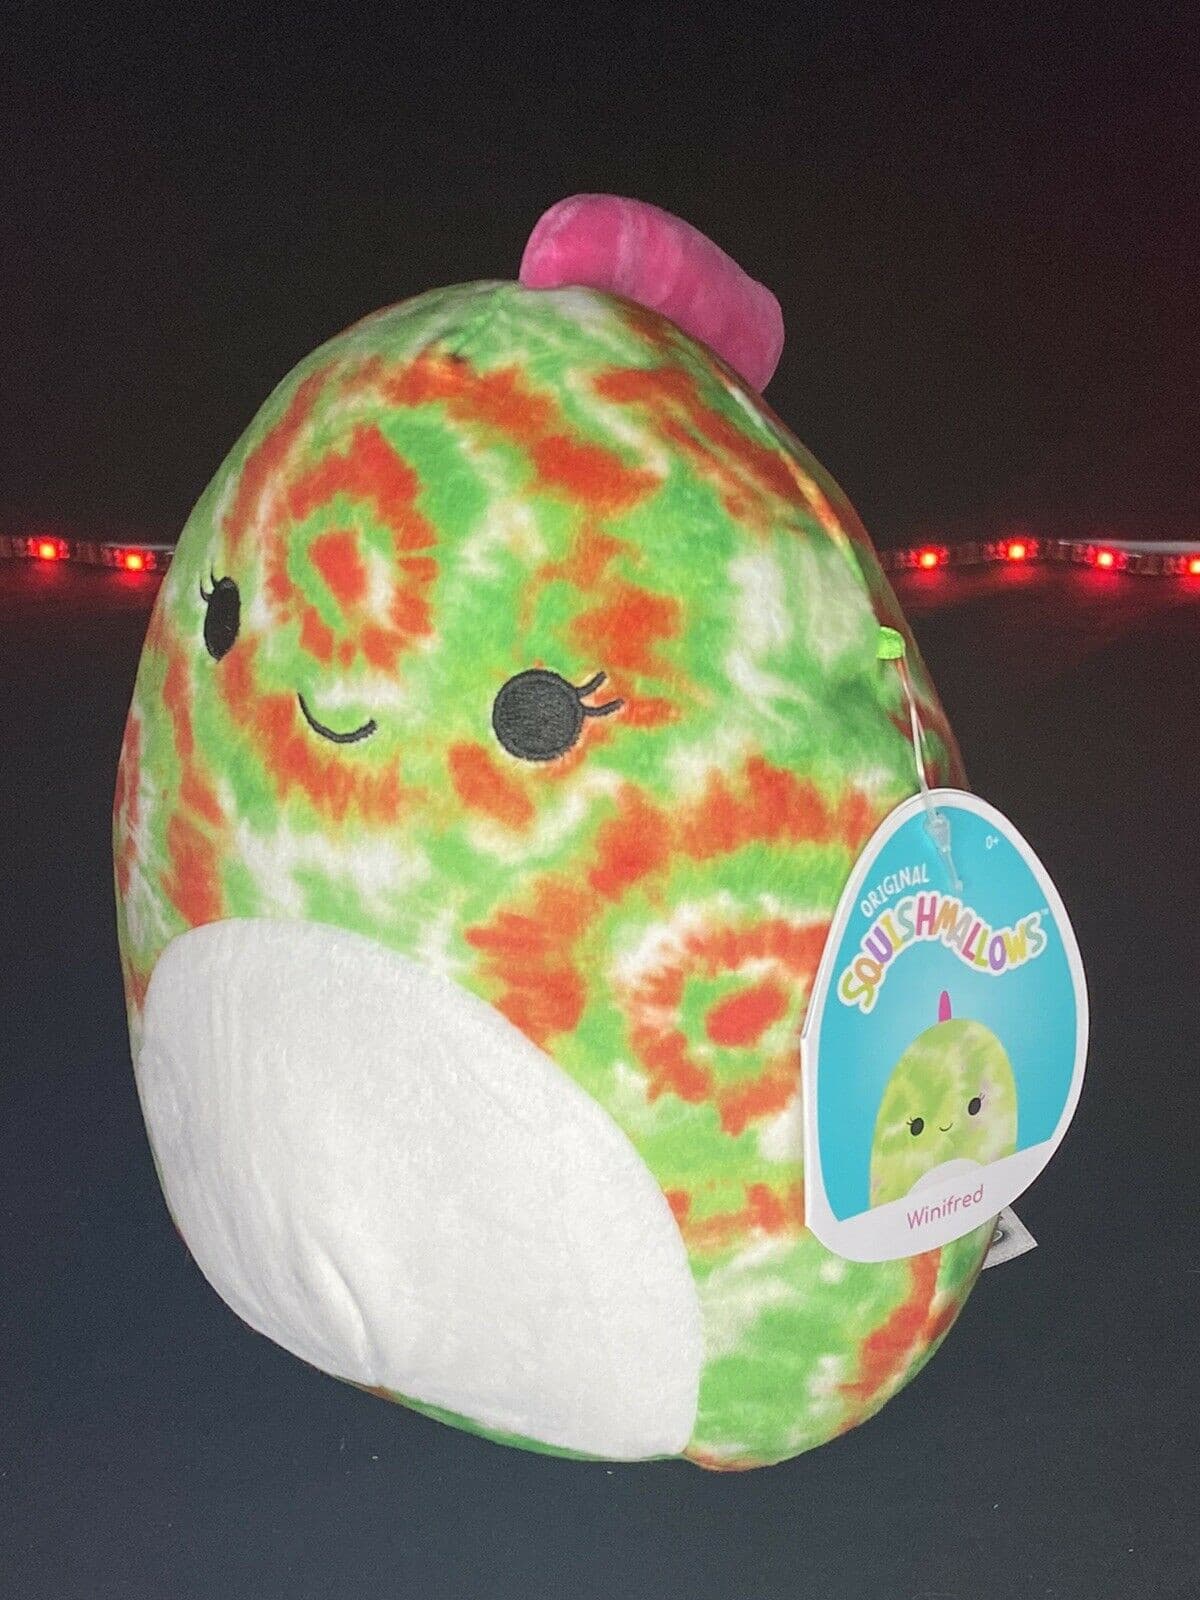 Squishmallow 8" Winifred the Chameleon Plush | Sweet Magnolia Charms.